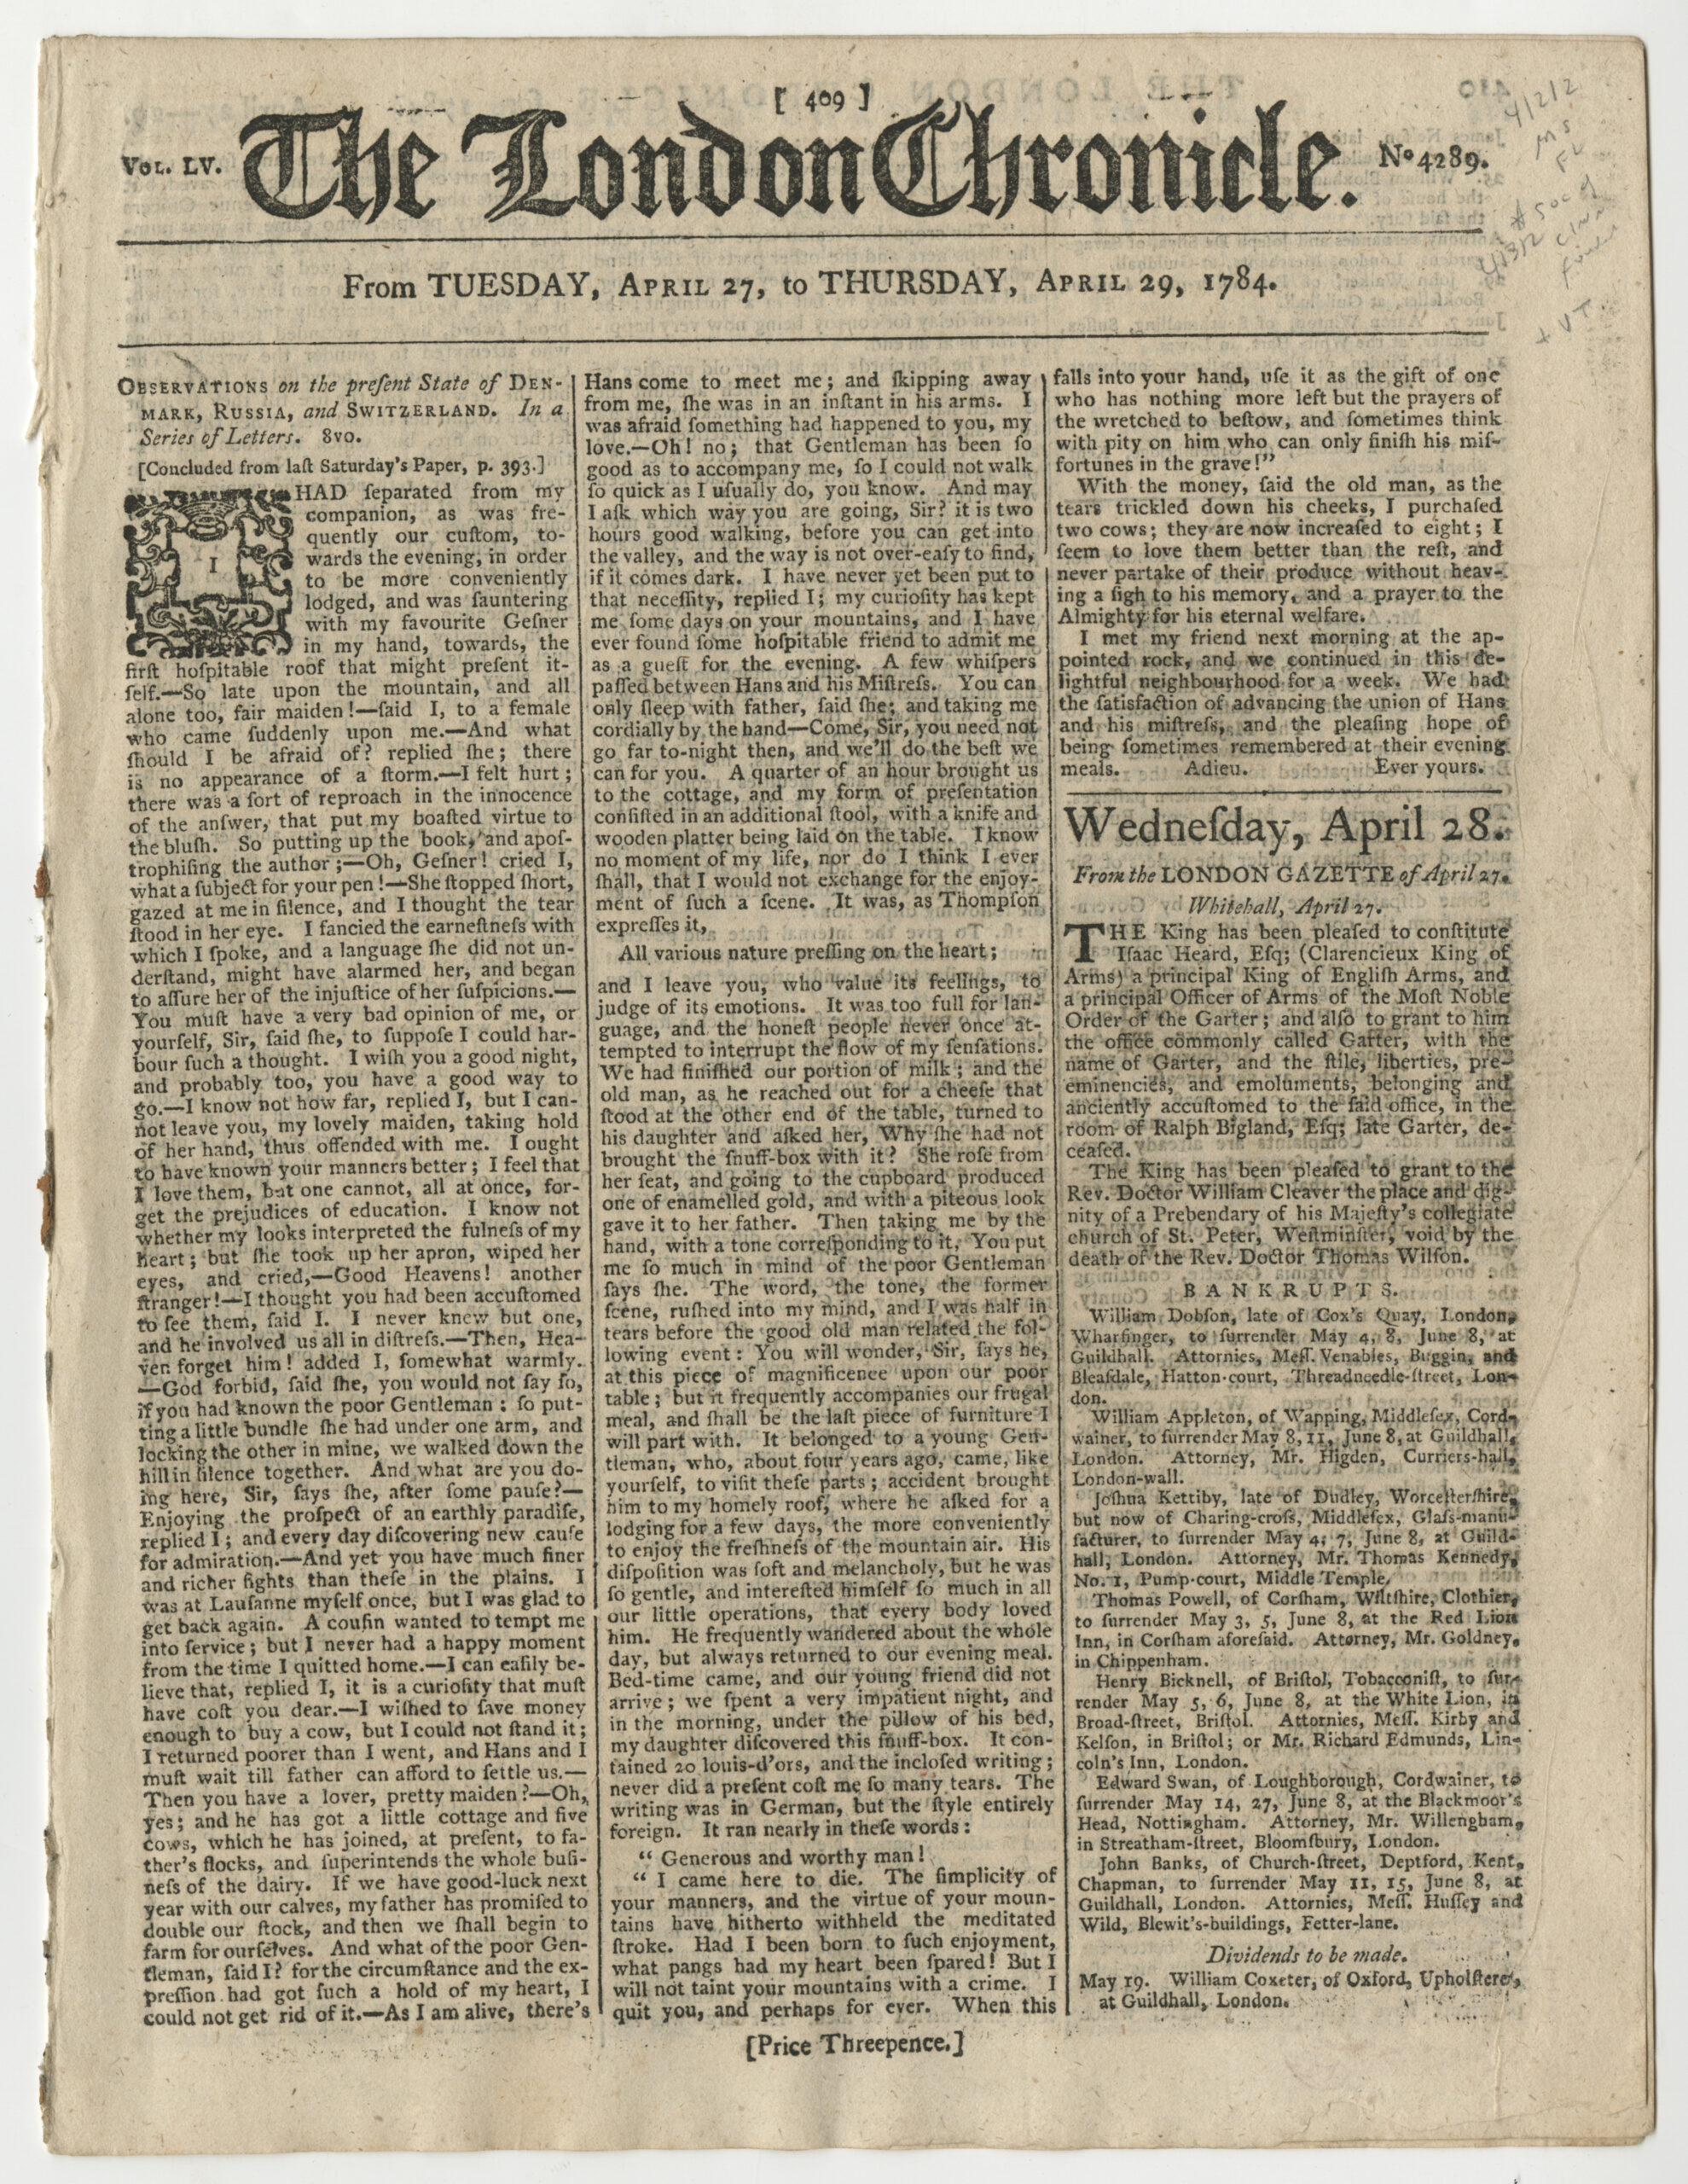 Newspapers - The American Revolution Institute